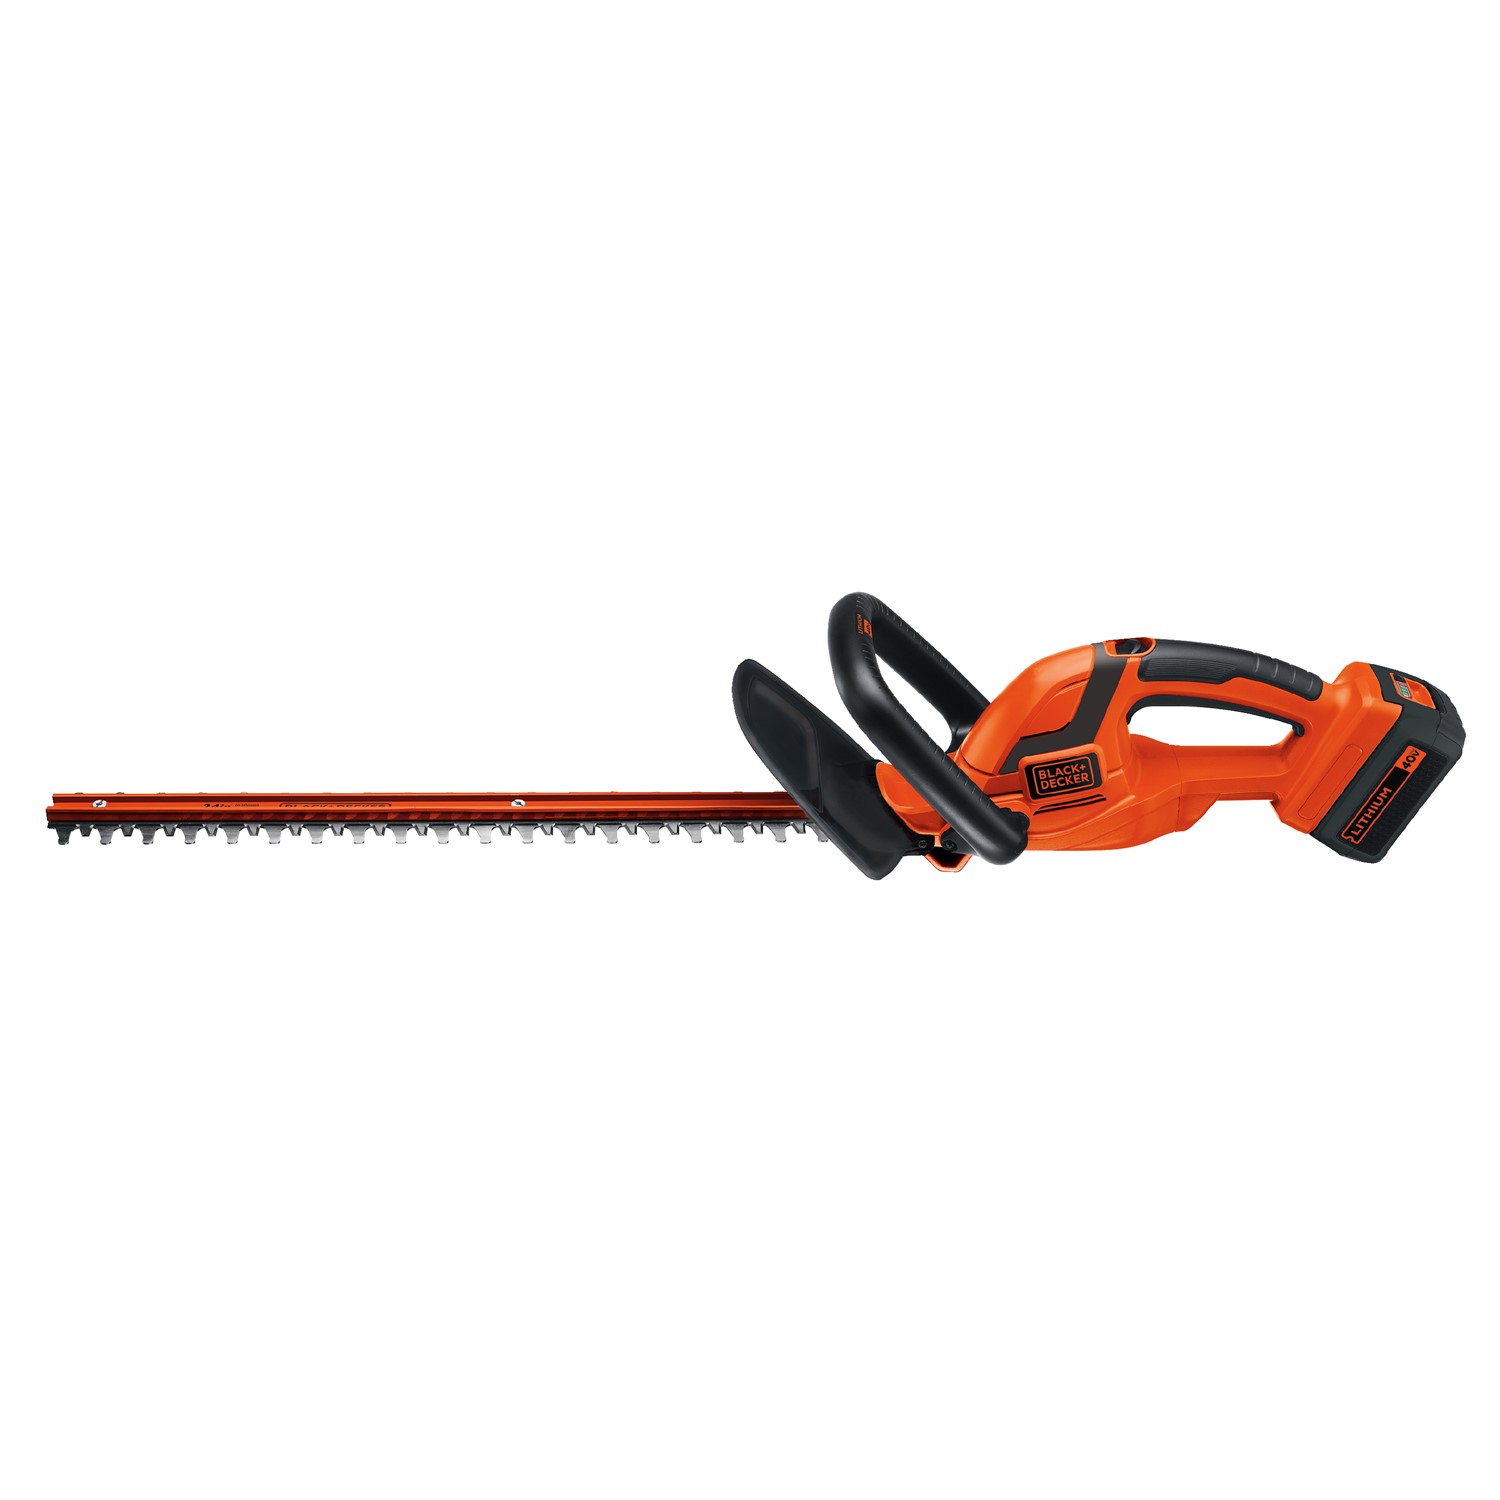 BLACK+DECKER LHT2436 40V MAX* Lithium-Ion 24" Cordless Hedge Trimmer, Battery and Charger Included - image 2 of 6